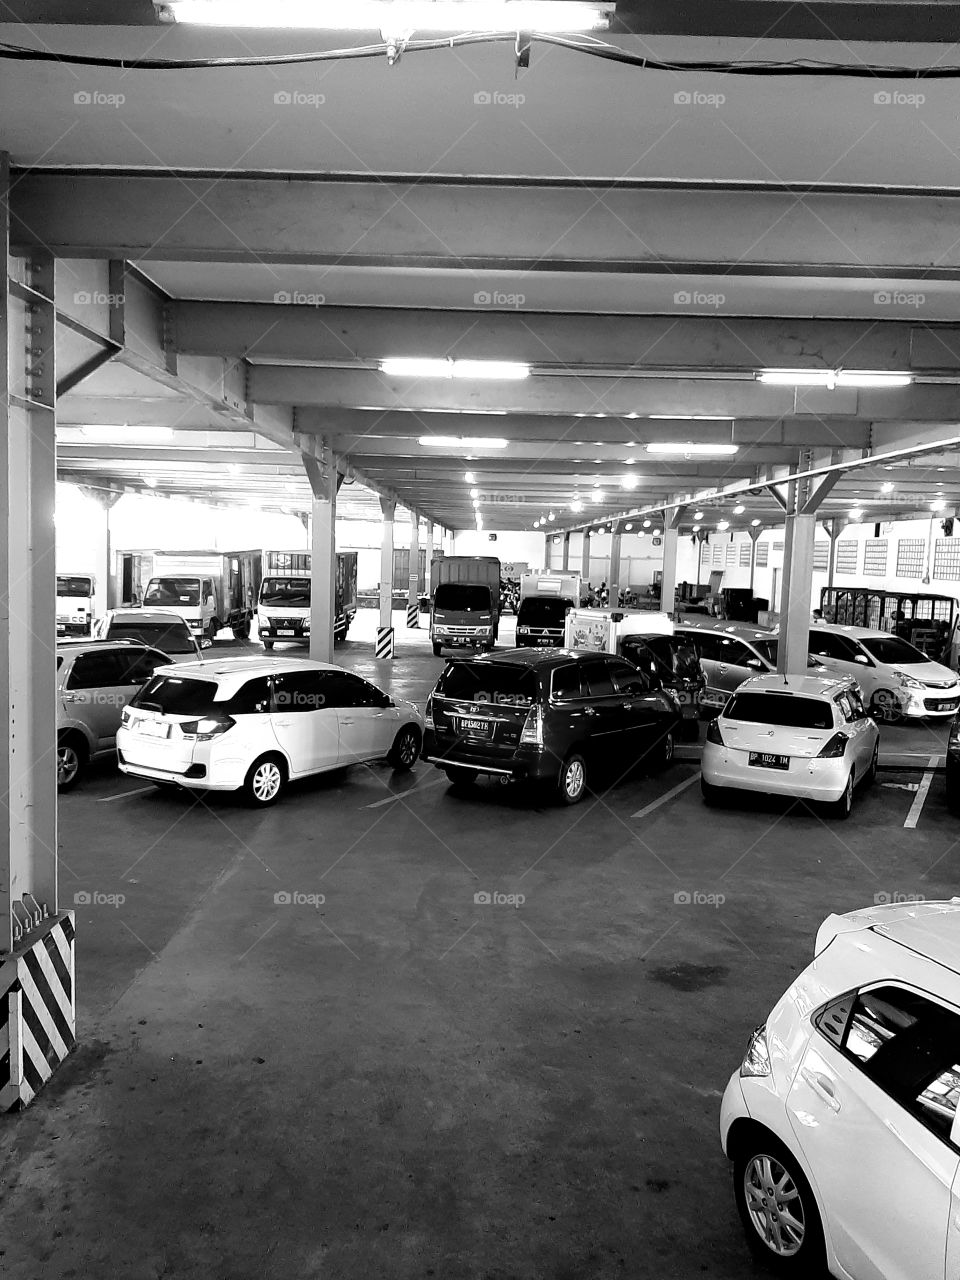 parking lot . too many cars waiting for the owner